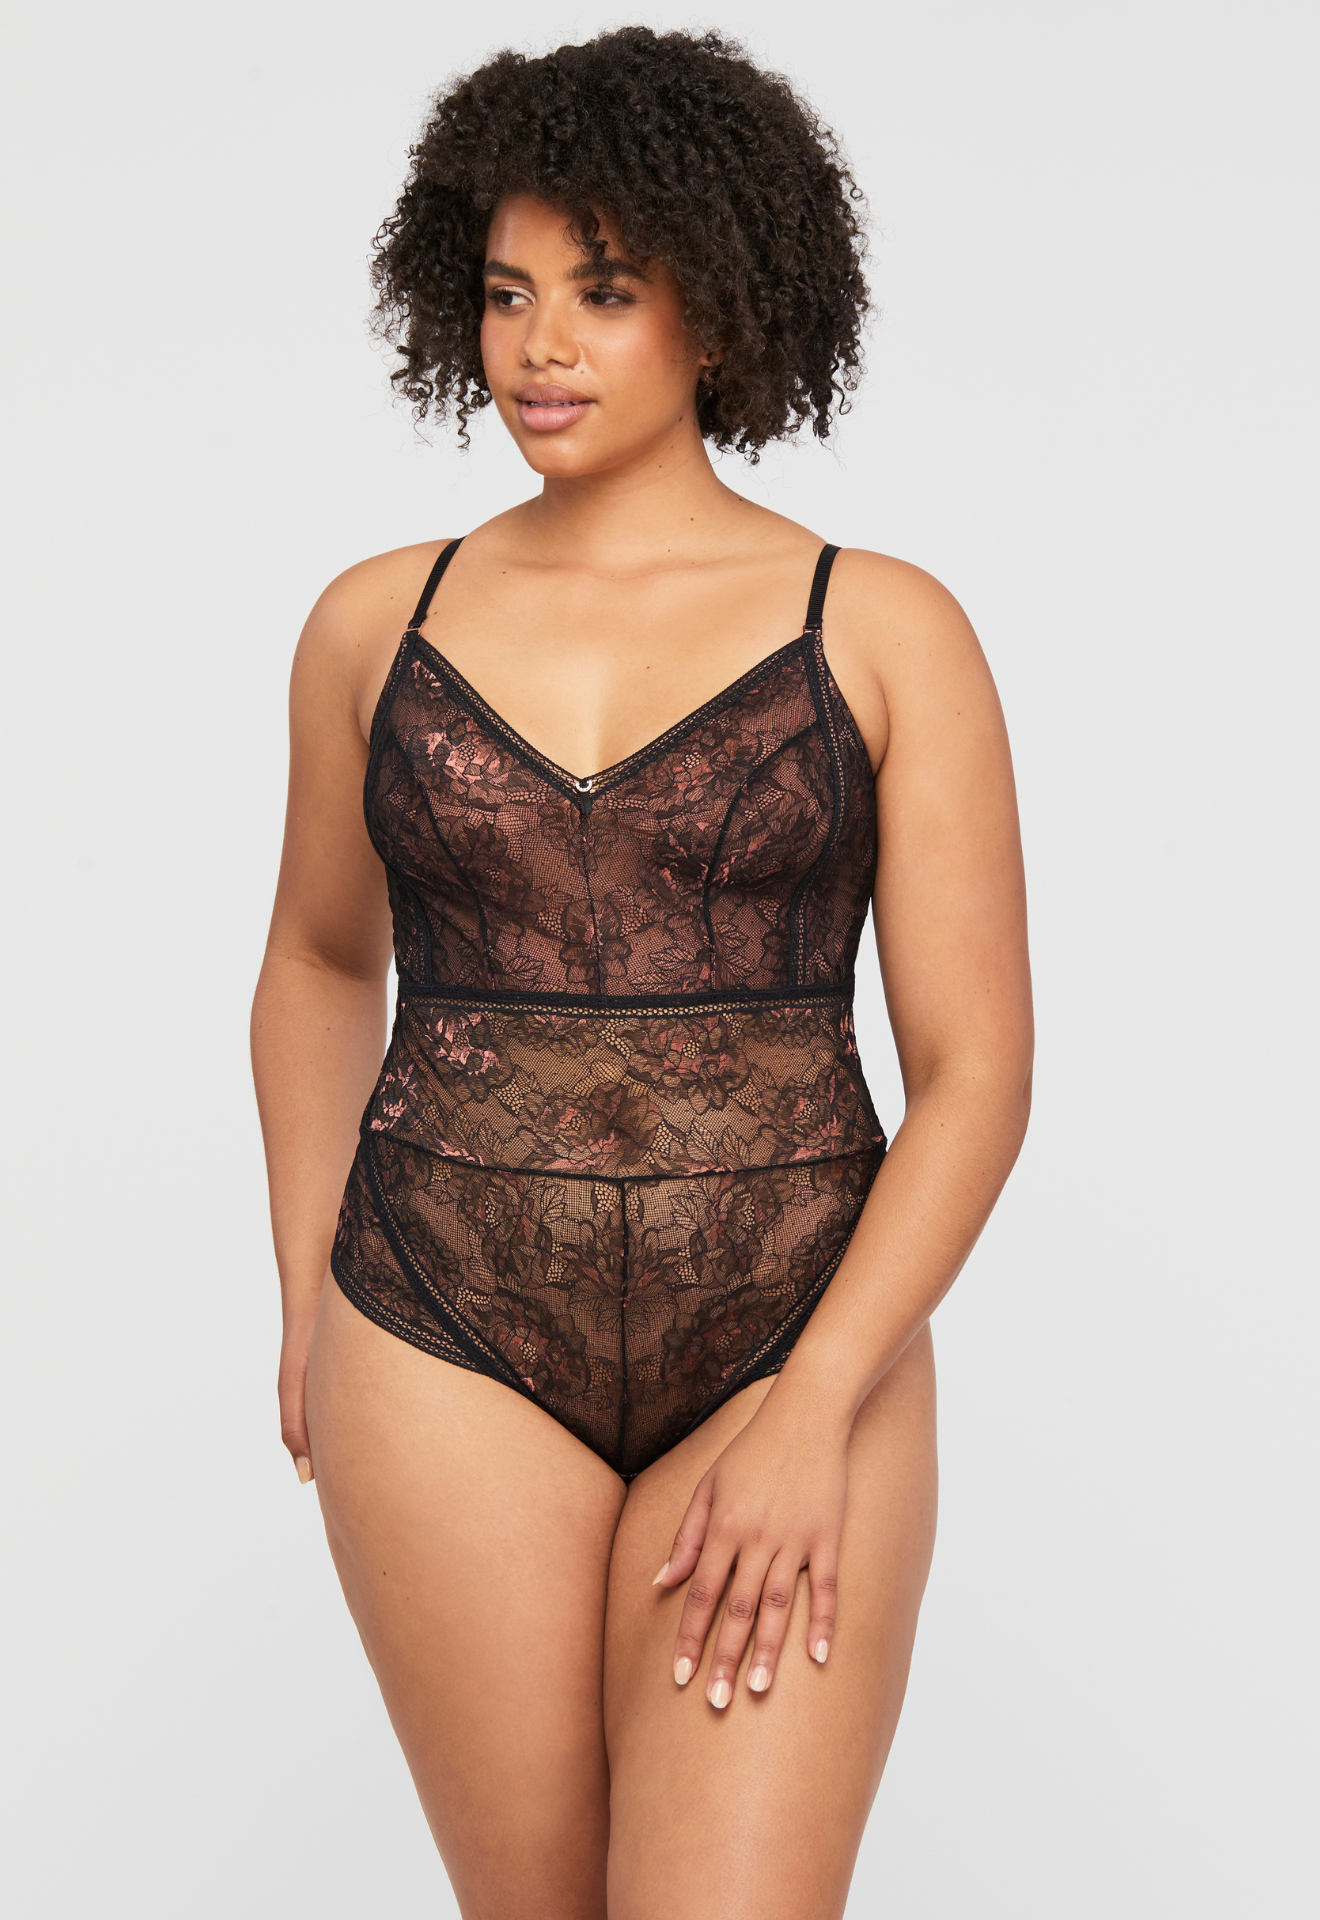 Enchanted Lace Bodysuit - Black/Pecan, worn by model, front view